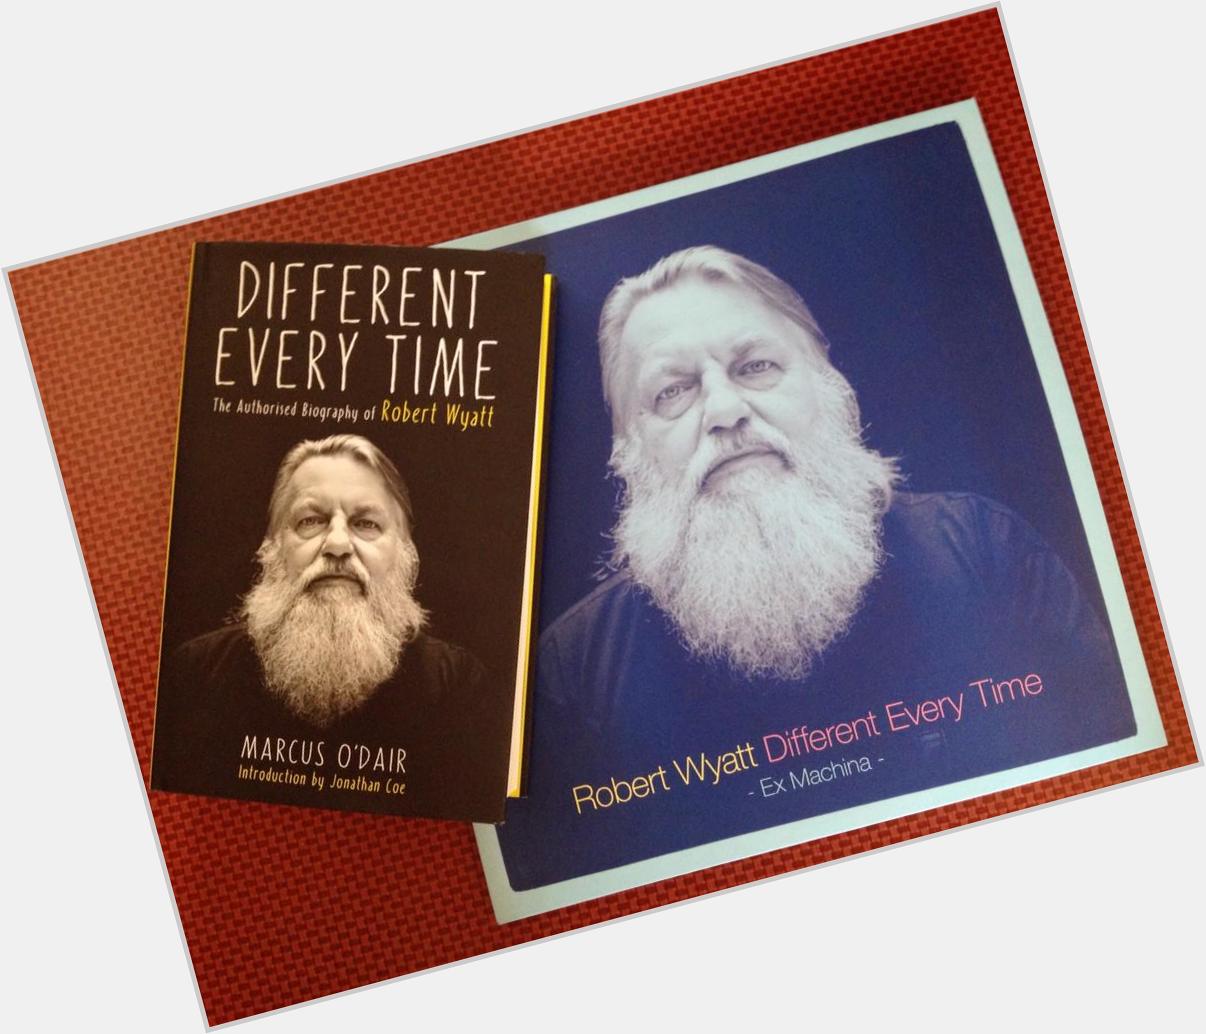 Happy 70th Birthday Robert Wyatt. His music/ voice part of my life for 40 of those 70 years. Now to read his bio. 